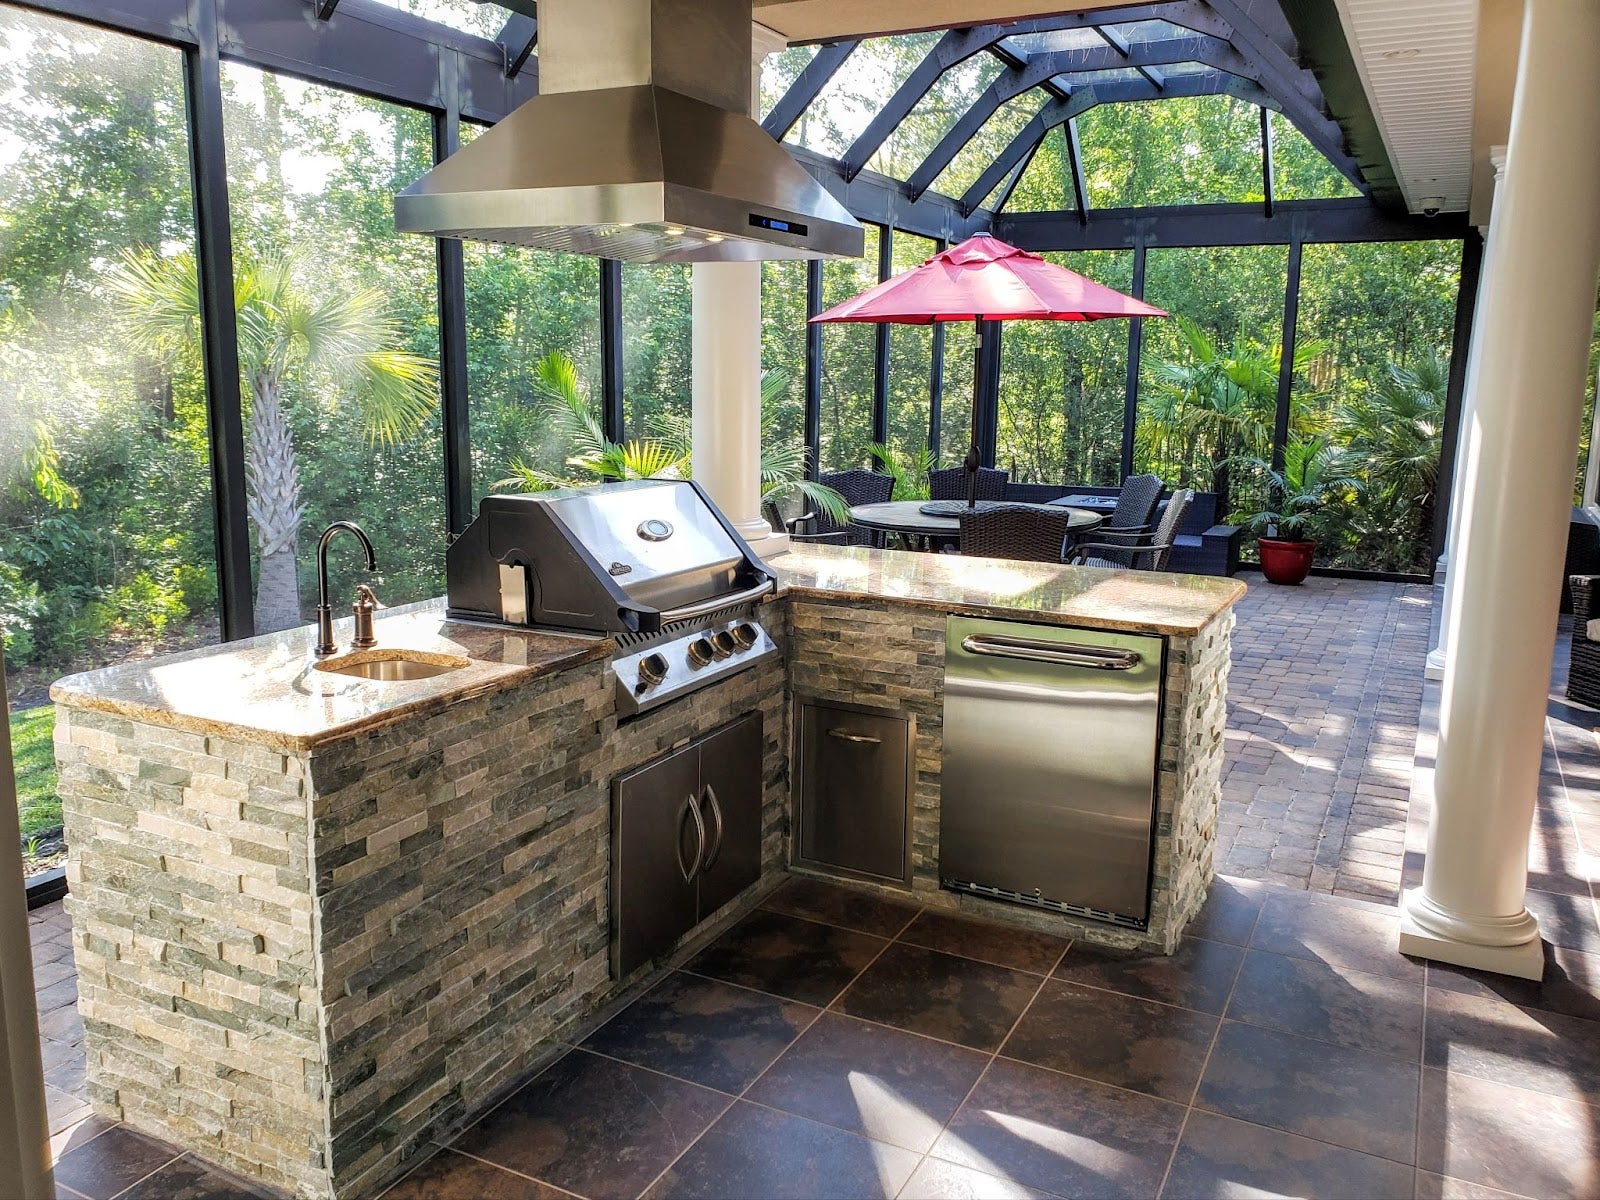 Luxurious outdoor kitchen with stainless steel appliances and stone cladding, complemented by a red umbrella patio set in a screened enclosure with a lush greenery backdrop. - Proline Range Hoods - prolinerangehoods.com 
